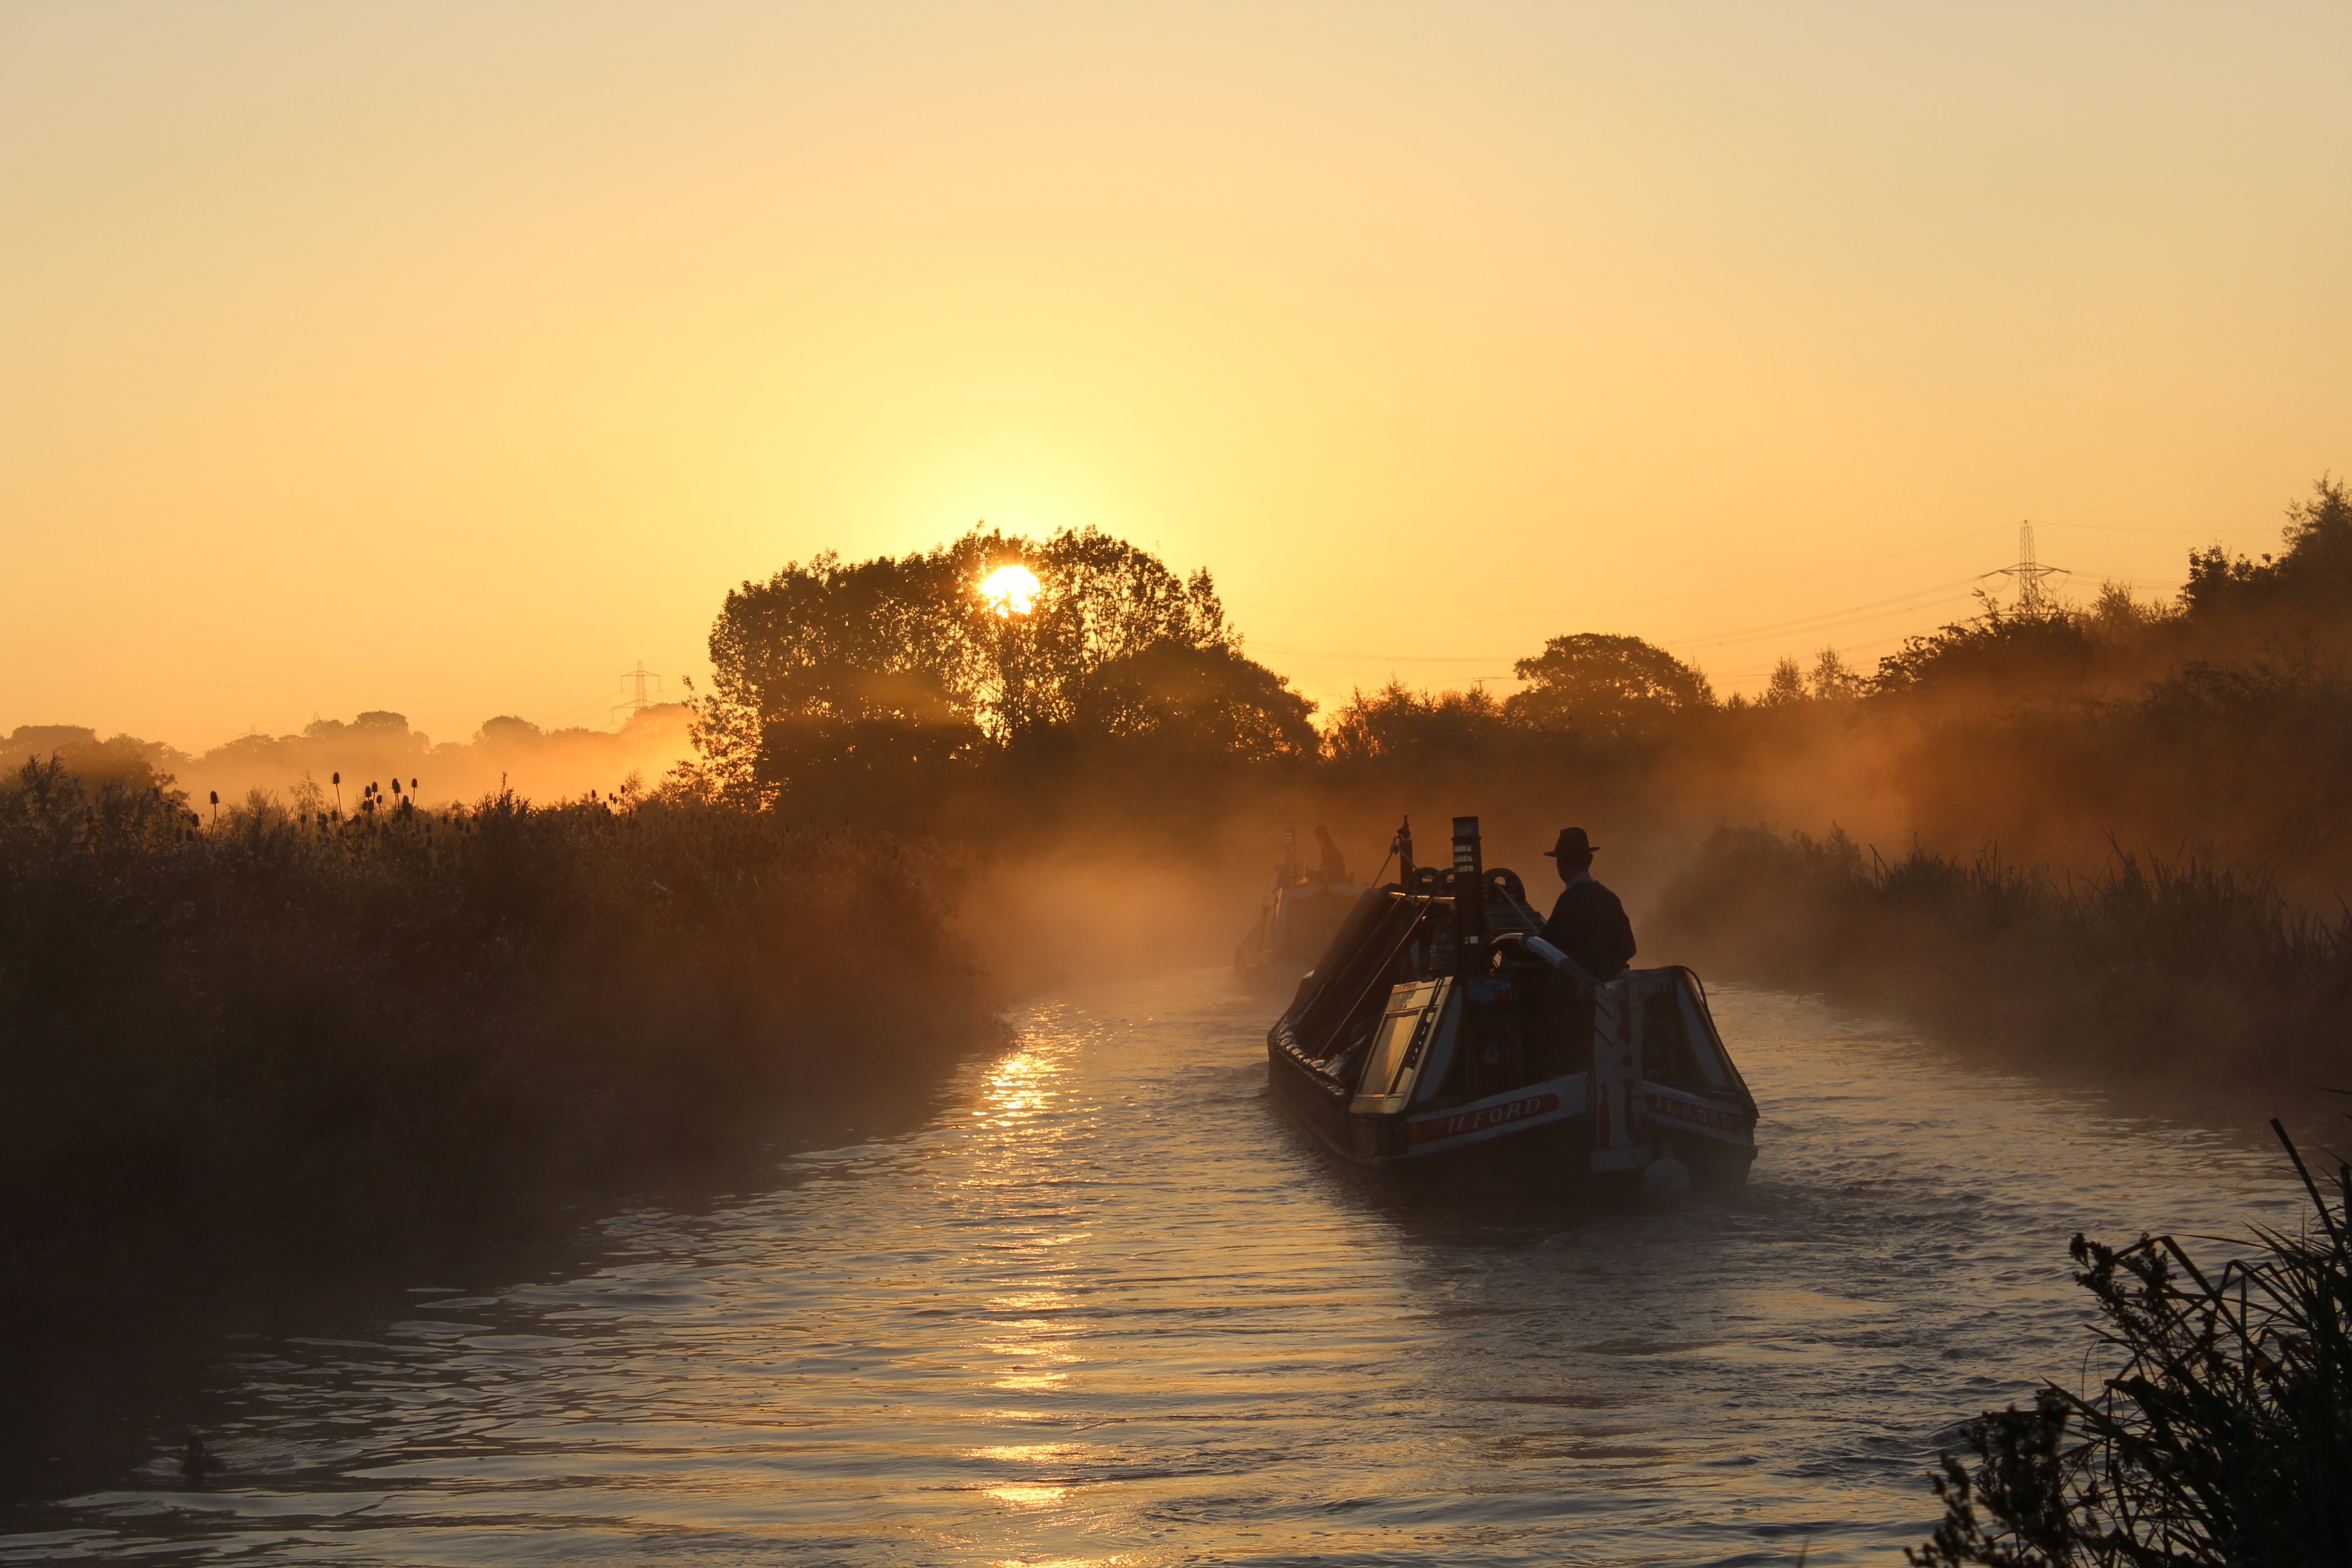 Butty boat Ilford breaks the September dawn by Teresa Fuller